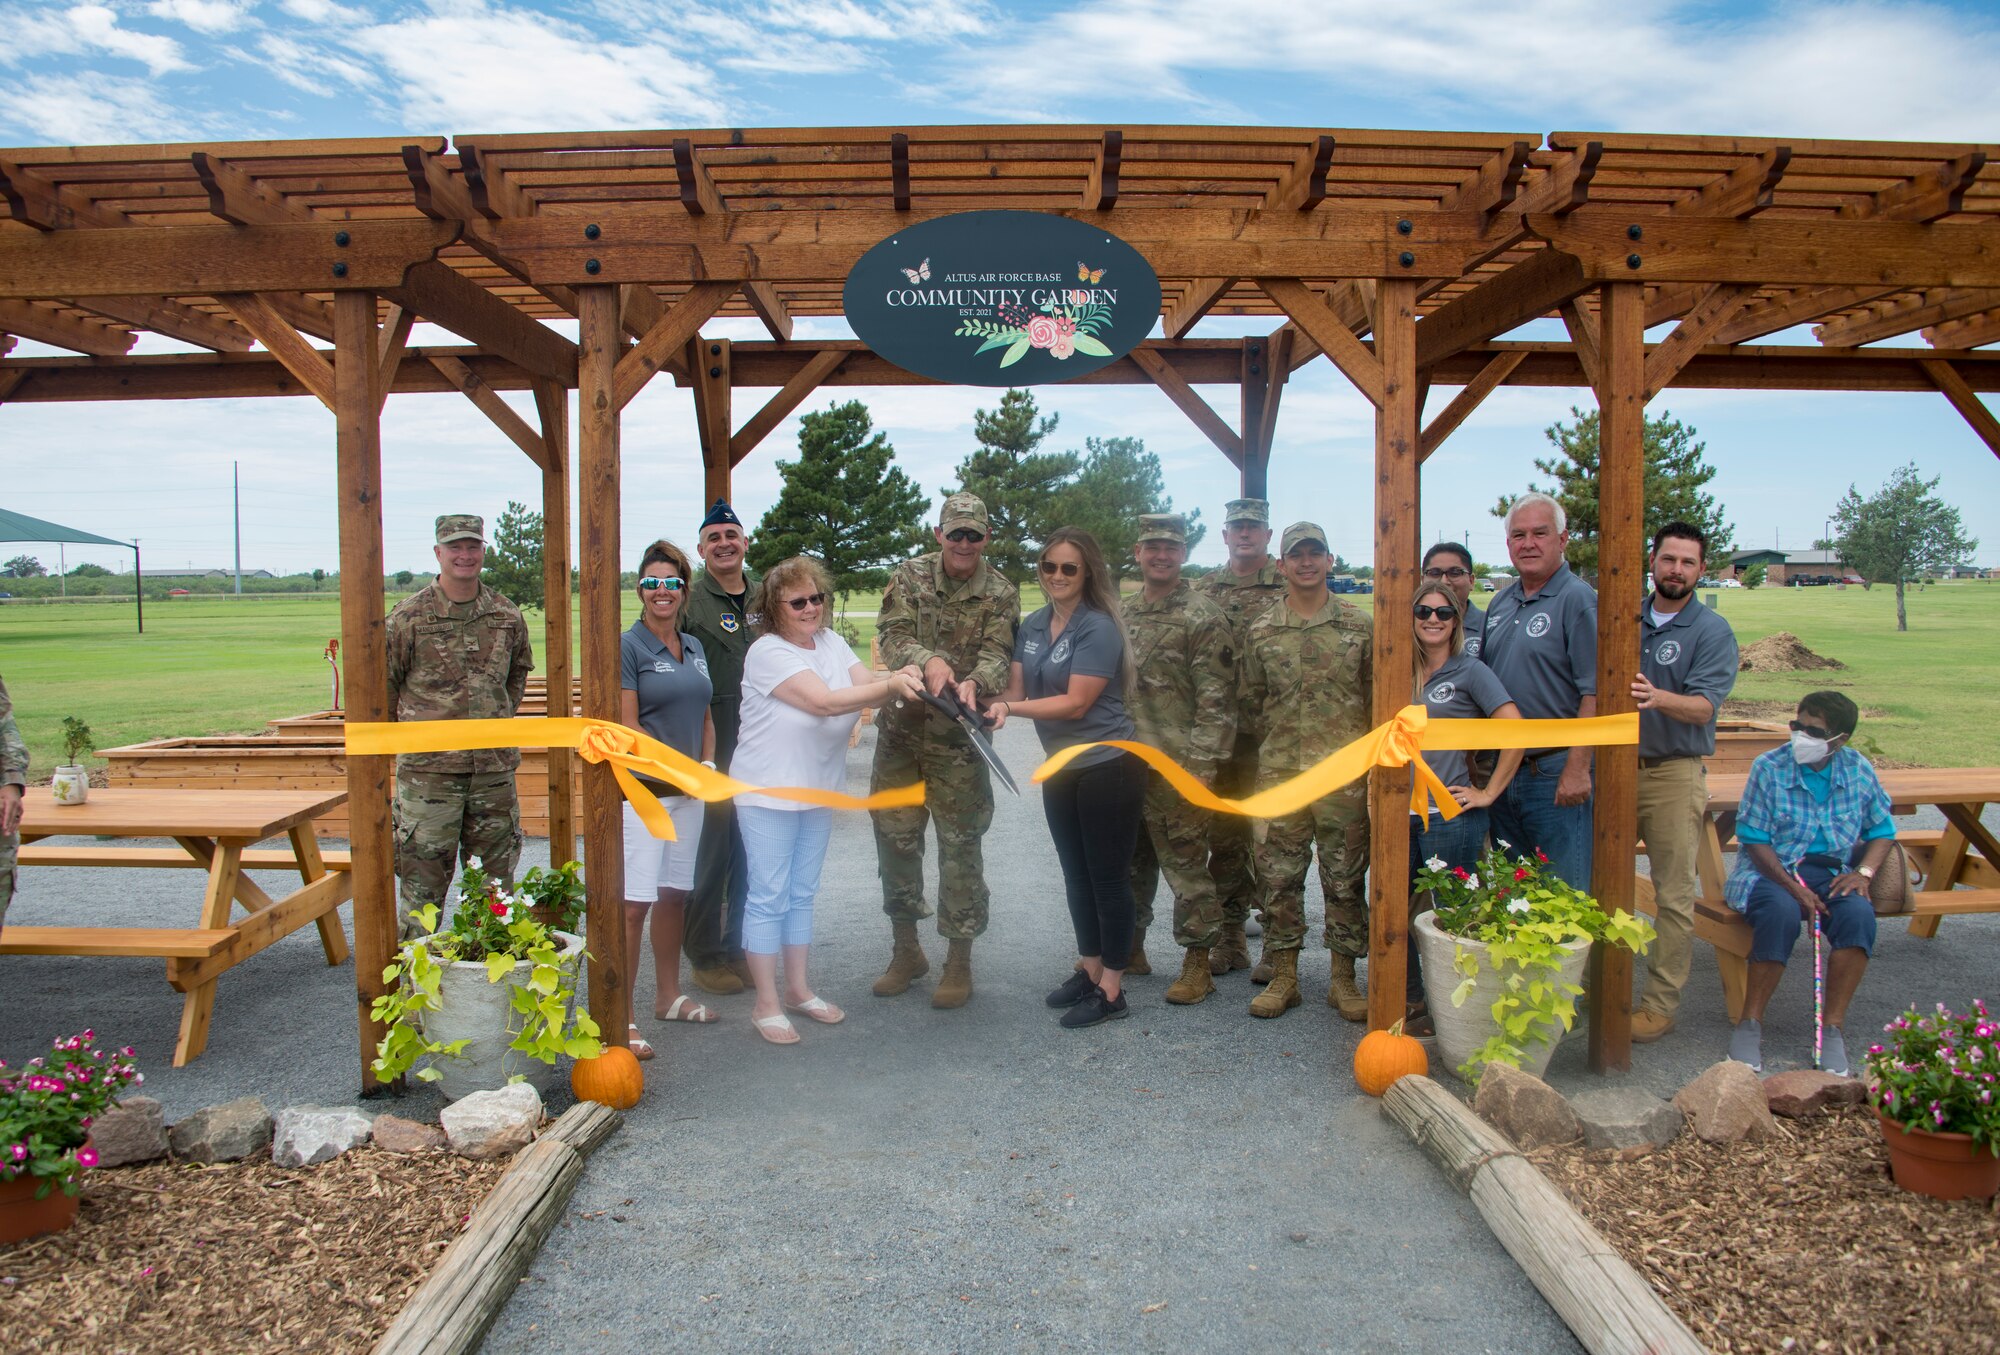 97th Air Mobility Wing members gather for a ribbon cutting ceremony for the opening of the Community Garden at Altus Air Force Base, Oklahoma, Aug. 20, 2021. After the ceremony was finished, individuals who rented plots could officially start planting their gardens. (U.S. Air Force photo by Airman 1st Class Amanda Lovelace)